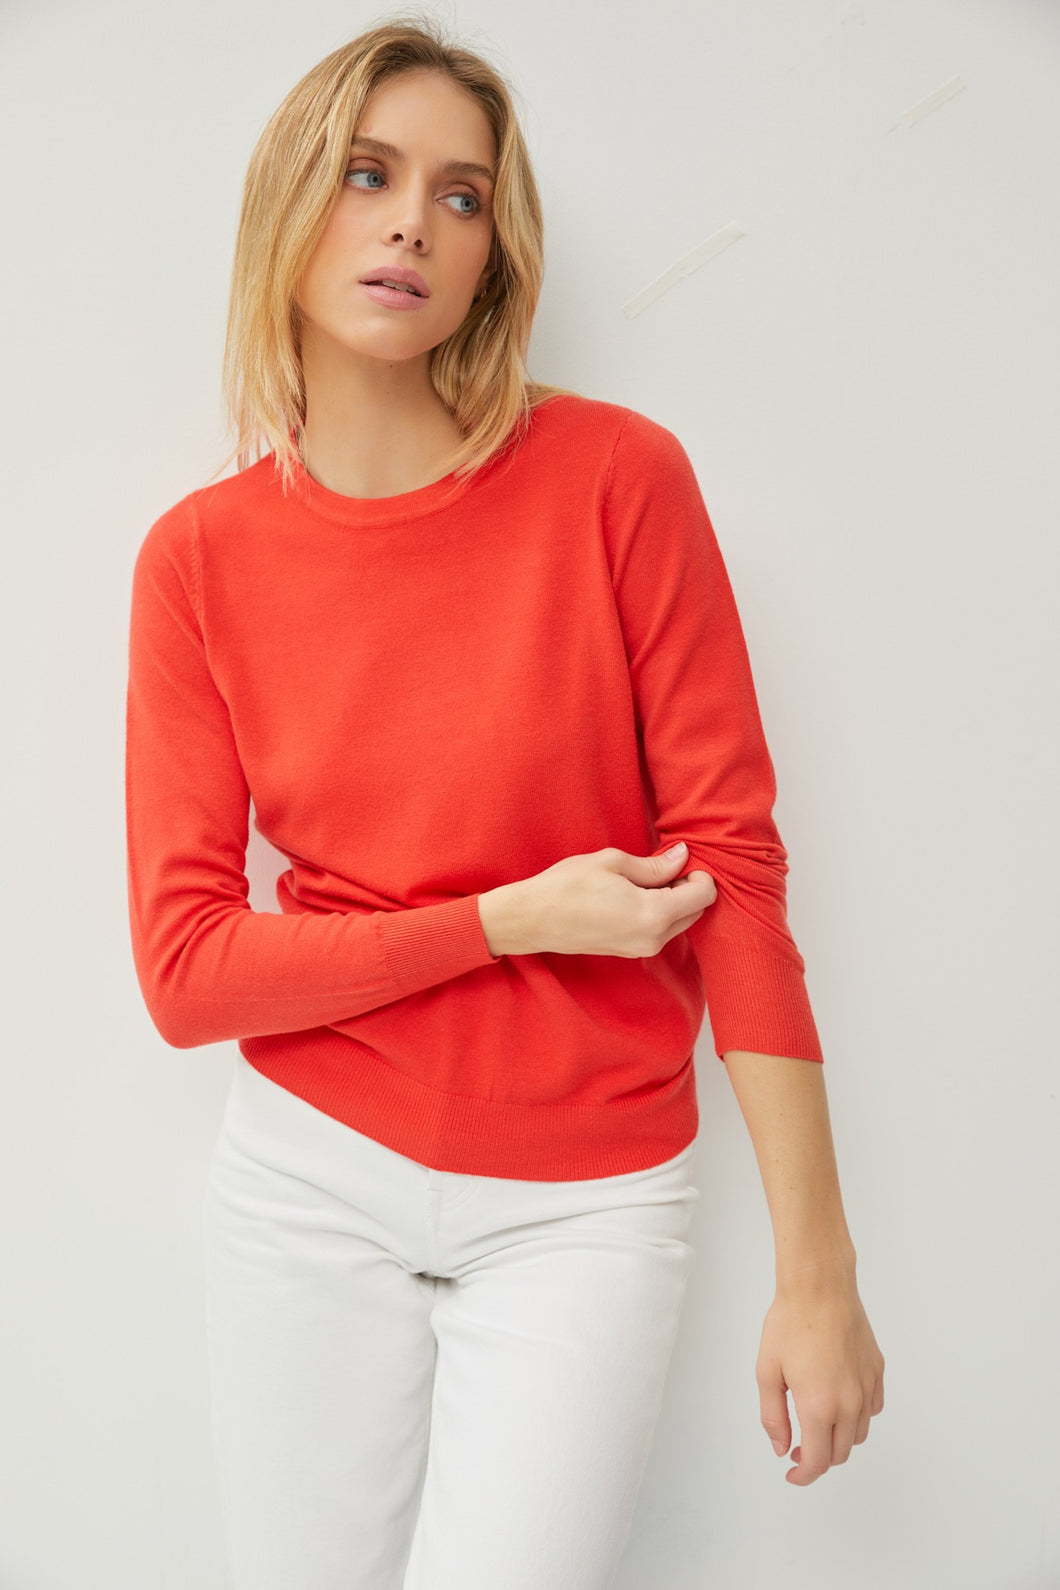 The Classic Red Sweater